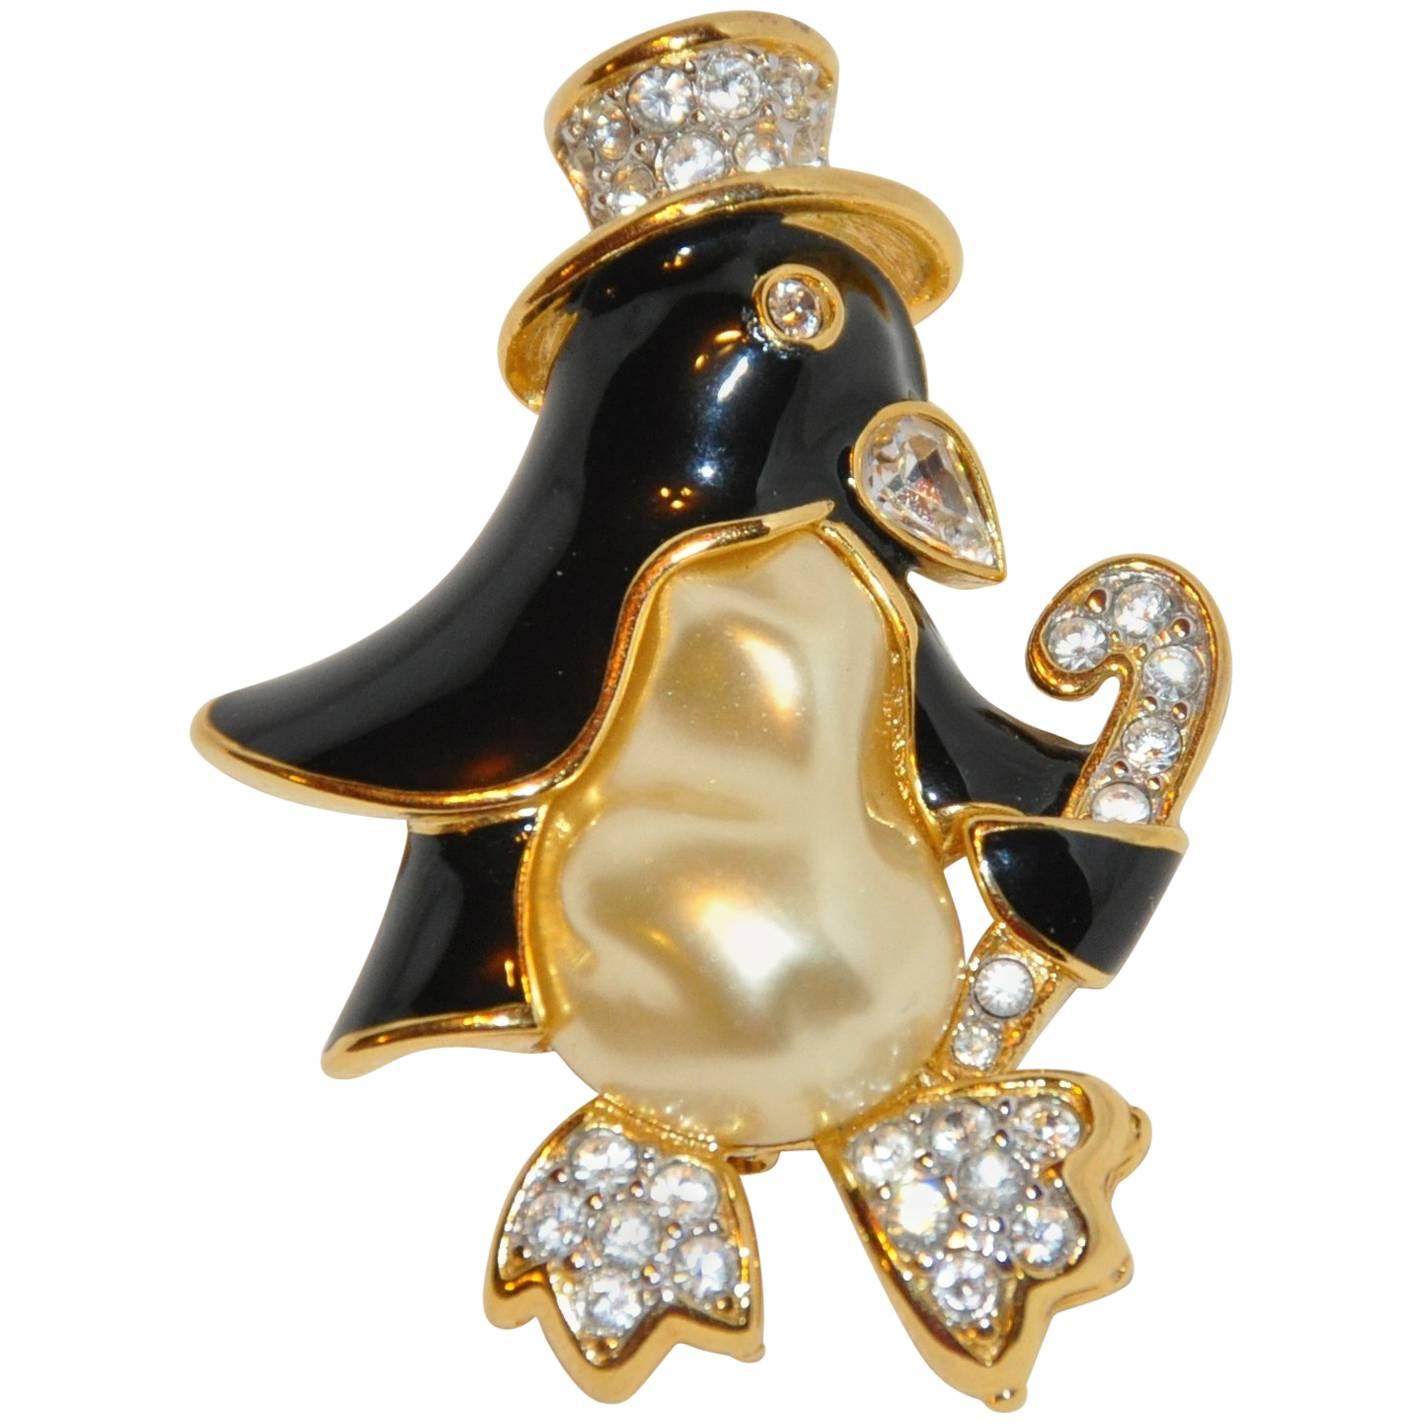 Kenneth Jay Lane Whimsical "Penguin with Top Hat" Brooch